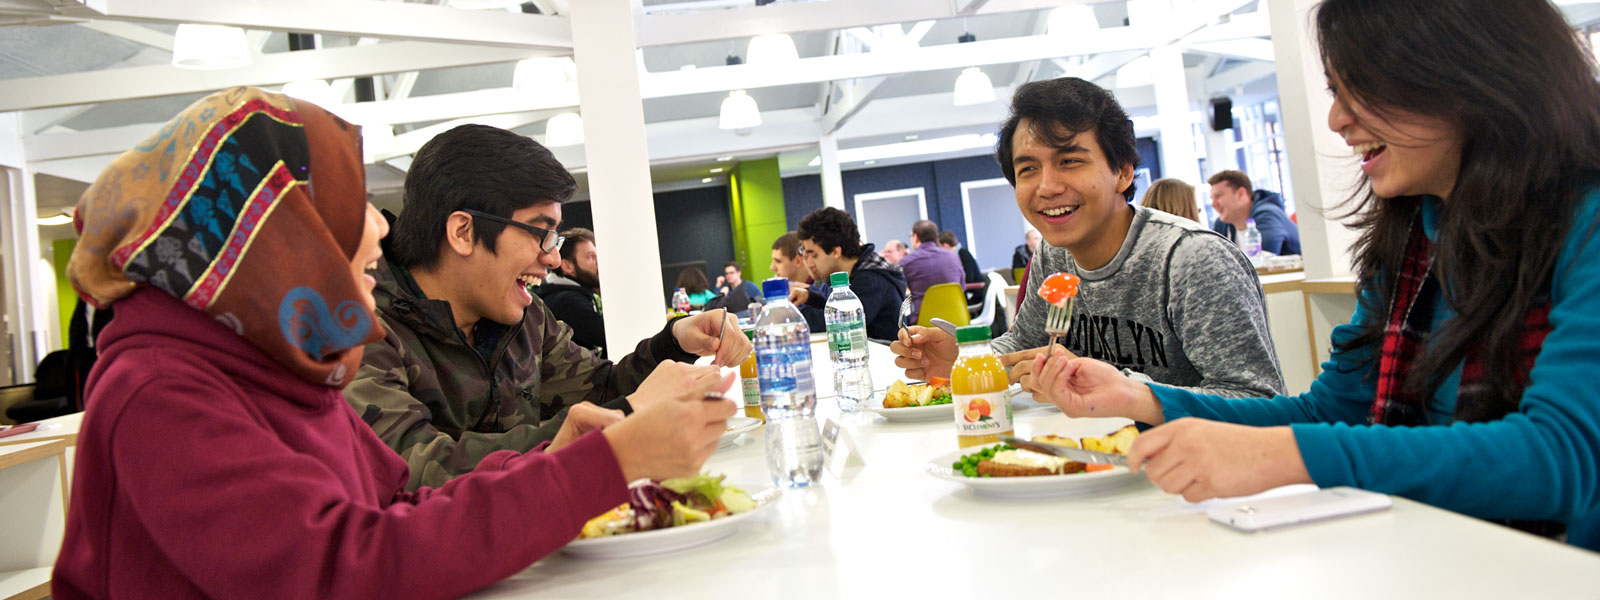 four students laugh while eating together in a Strathclyde cafe